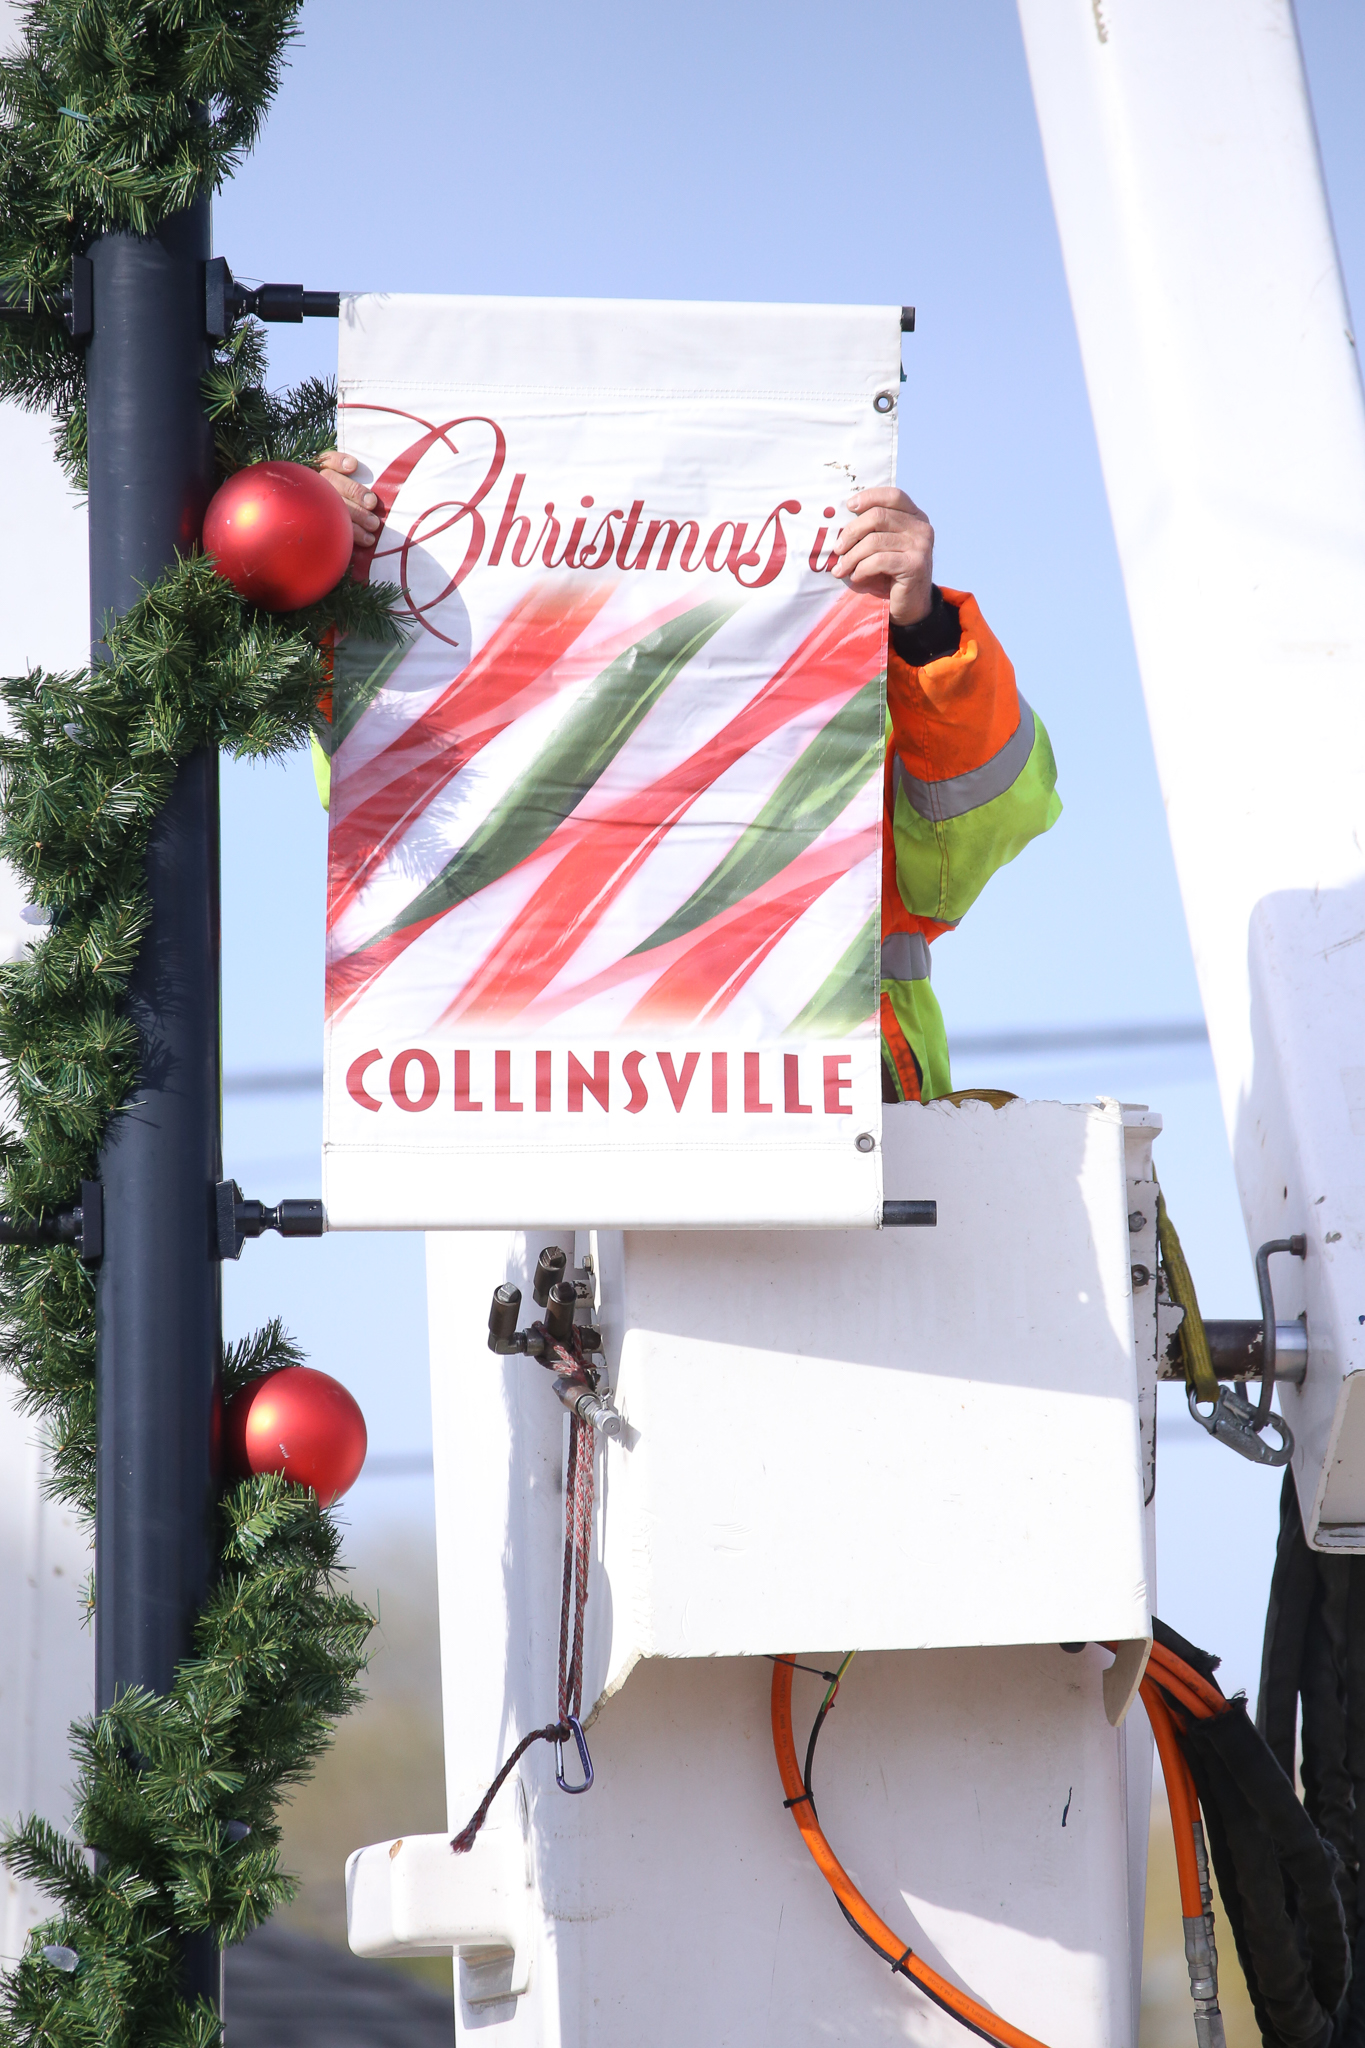 A city worker installs a "Christmas in Collinsvile" banner Monday, Nov. 21, 2016 on Main St. (Photograph by Brian Munoz / The Collinsville Chronicle)